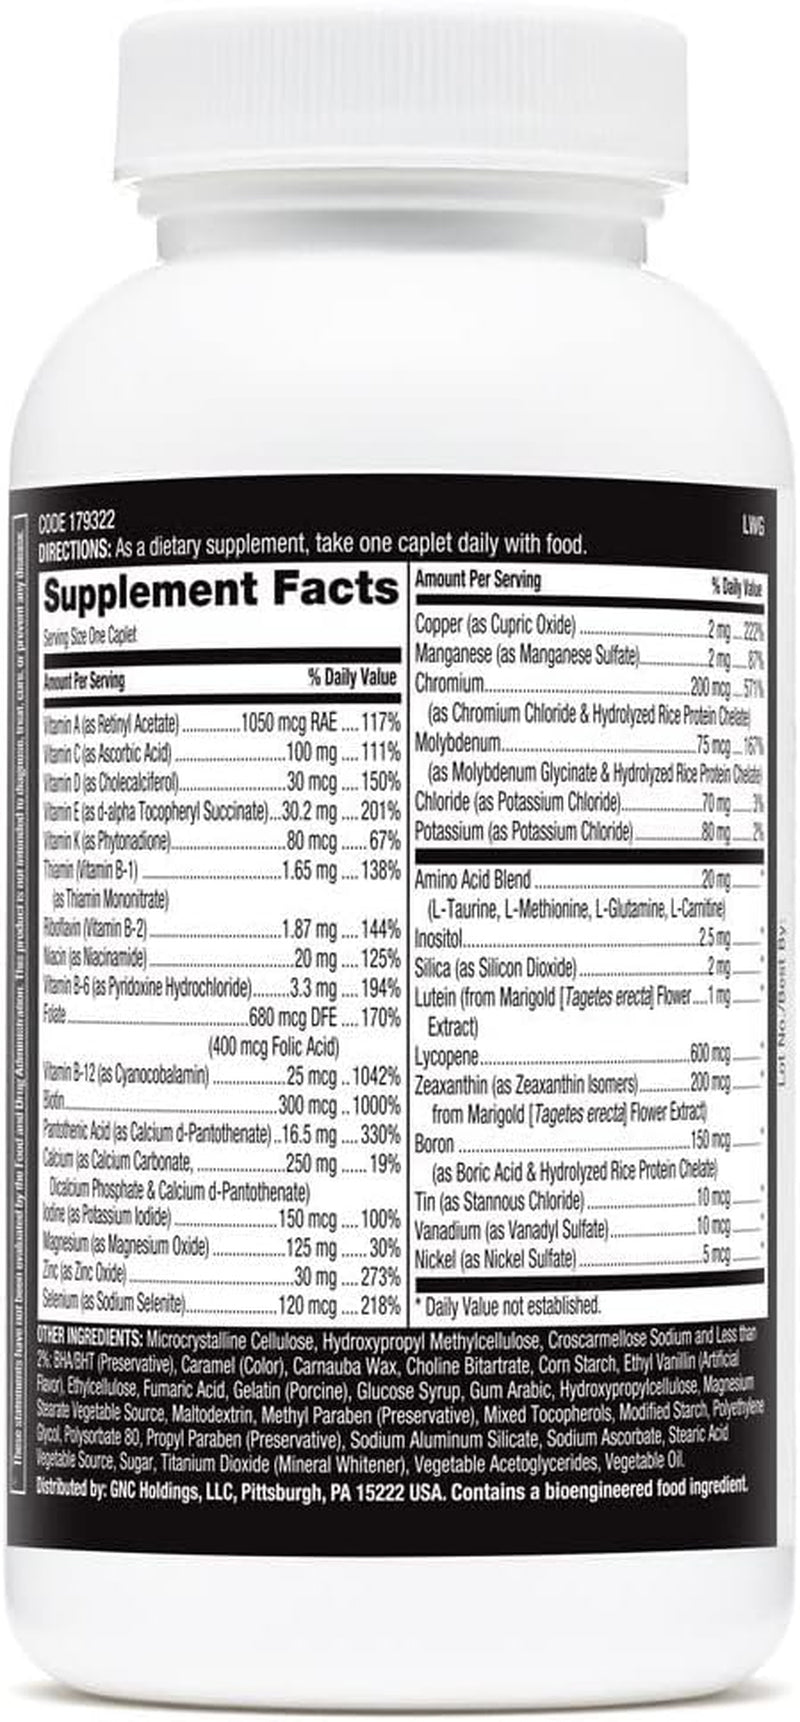 Mega Men Essentials One Daily Multivitamin | Supports Overall Health and Muscle Performance | 60 Count